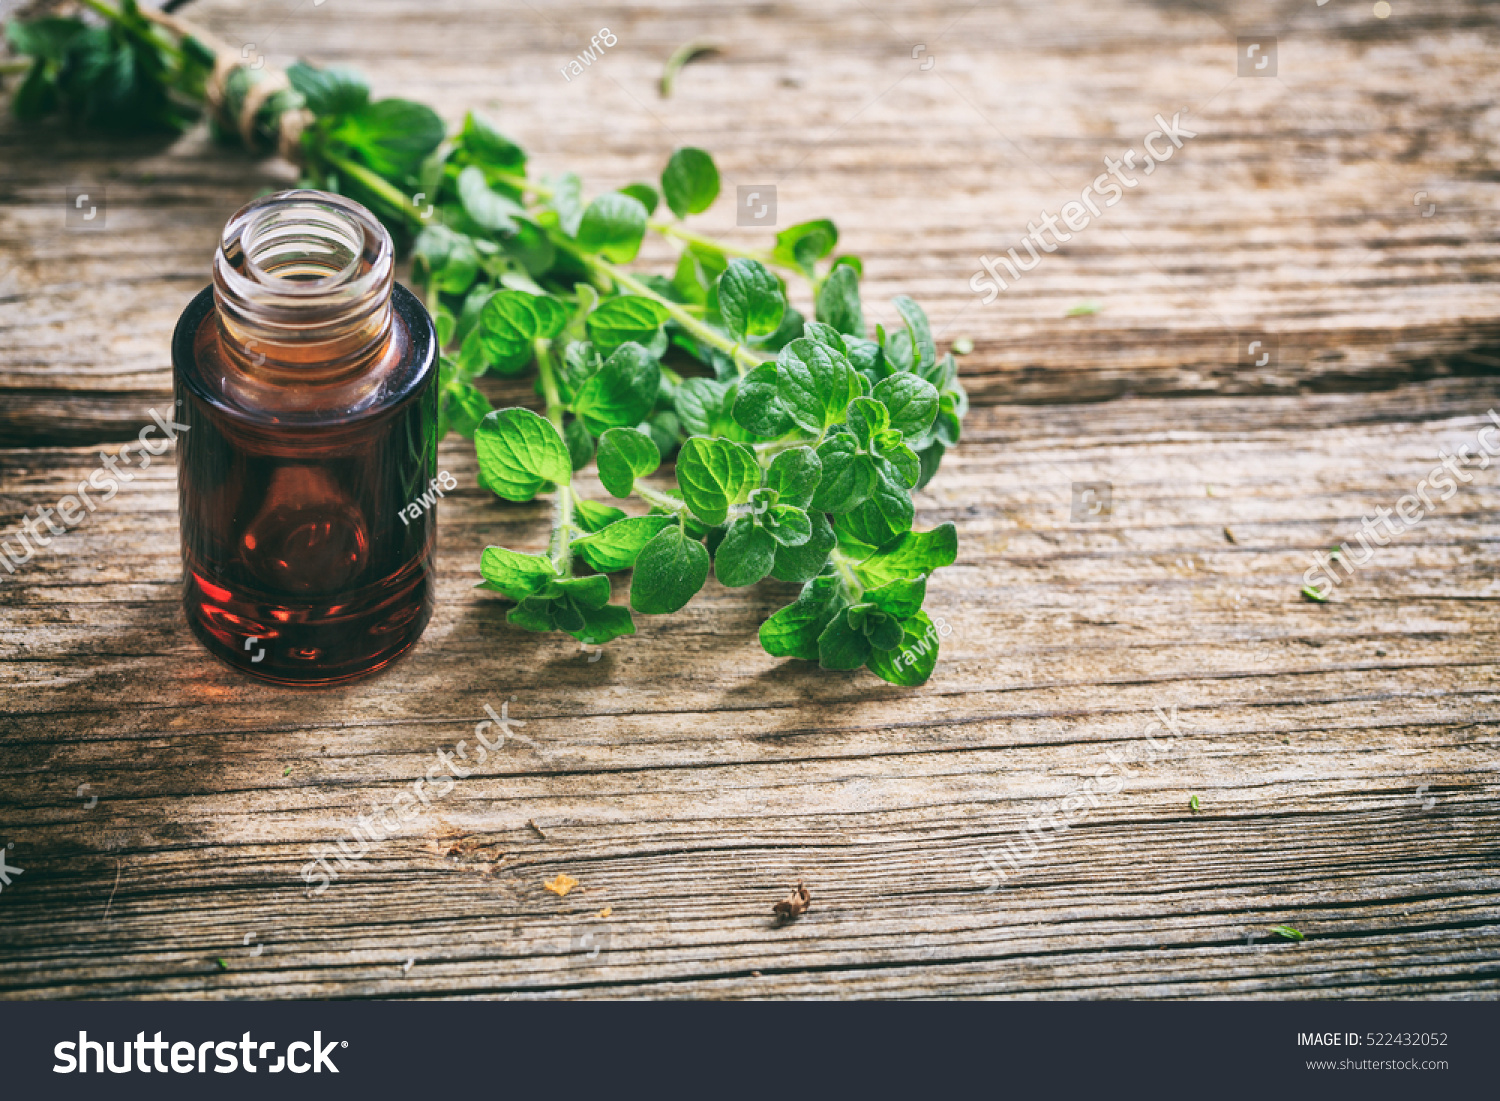 Oregano essential oil and fresh twig on wooden background, copy space #522432052